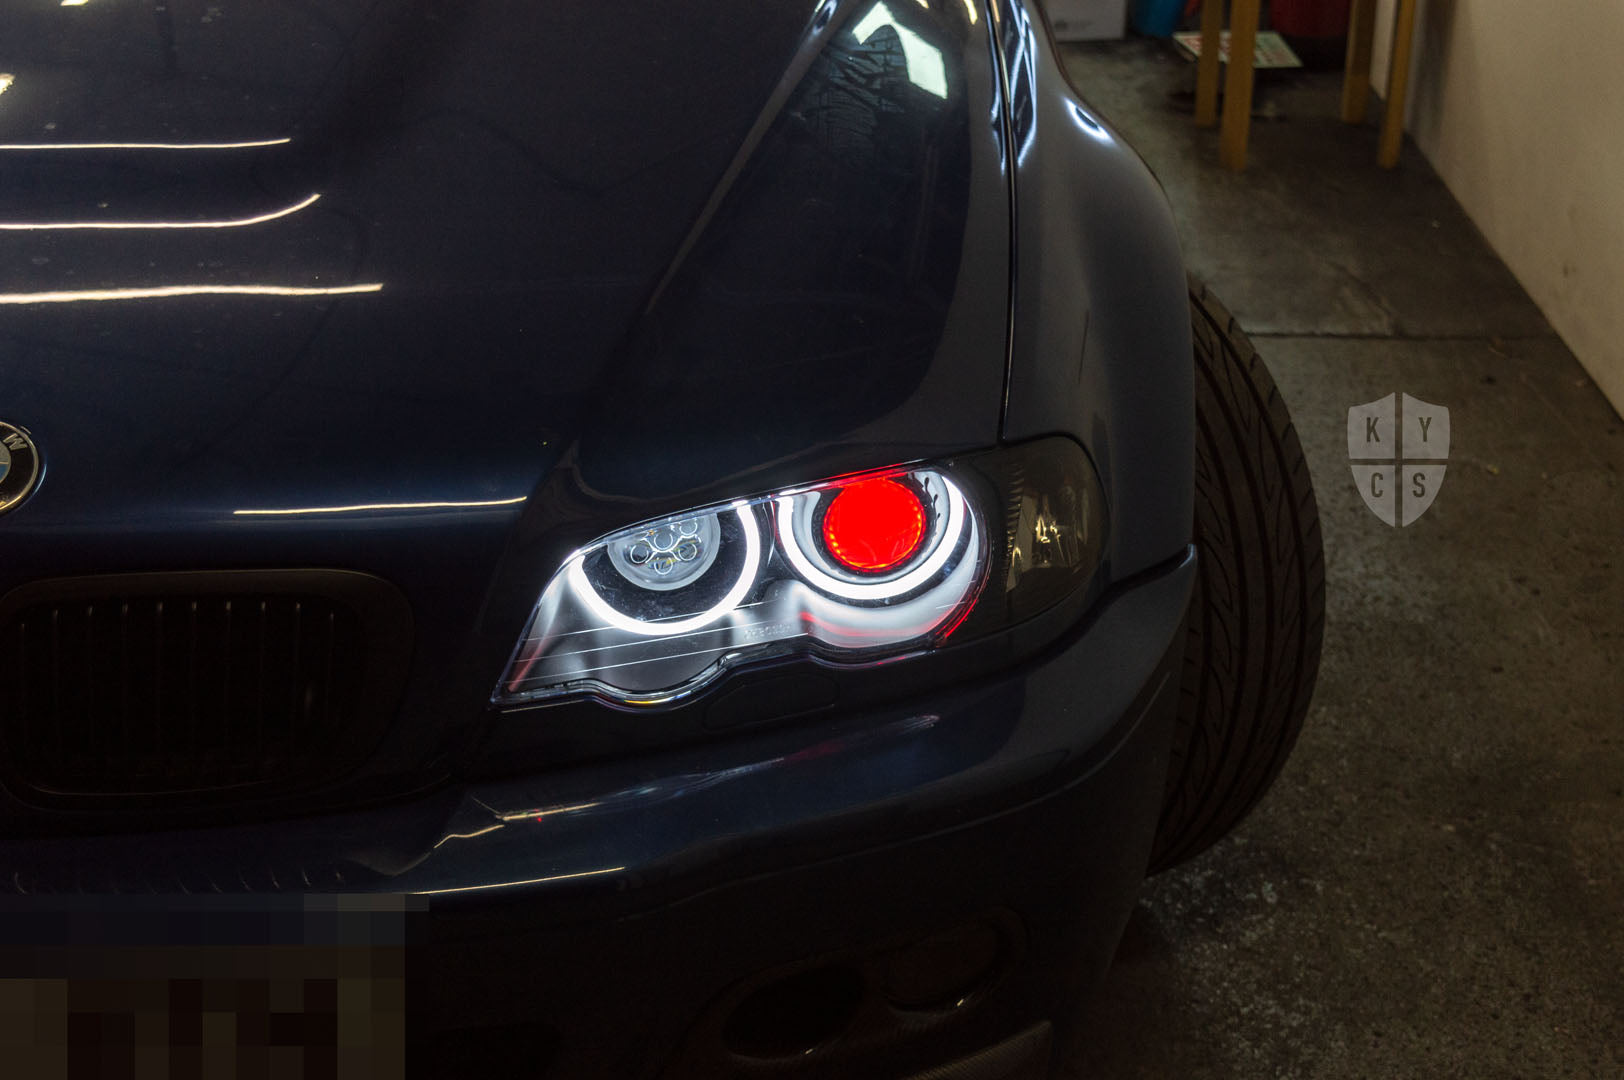 BMW E46 headlight page information and repair upgrade options